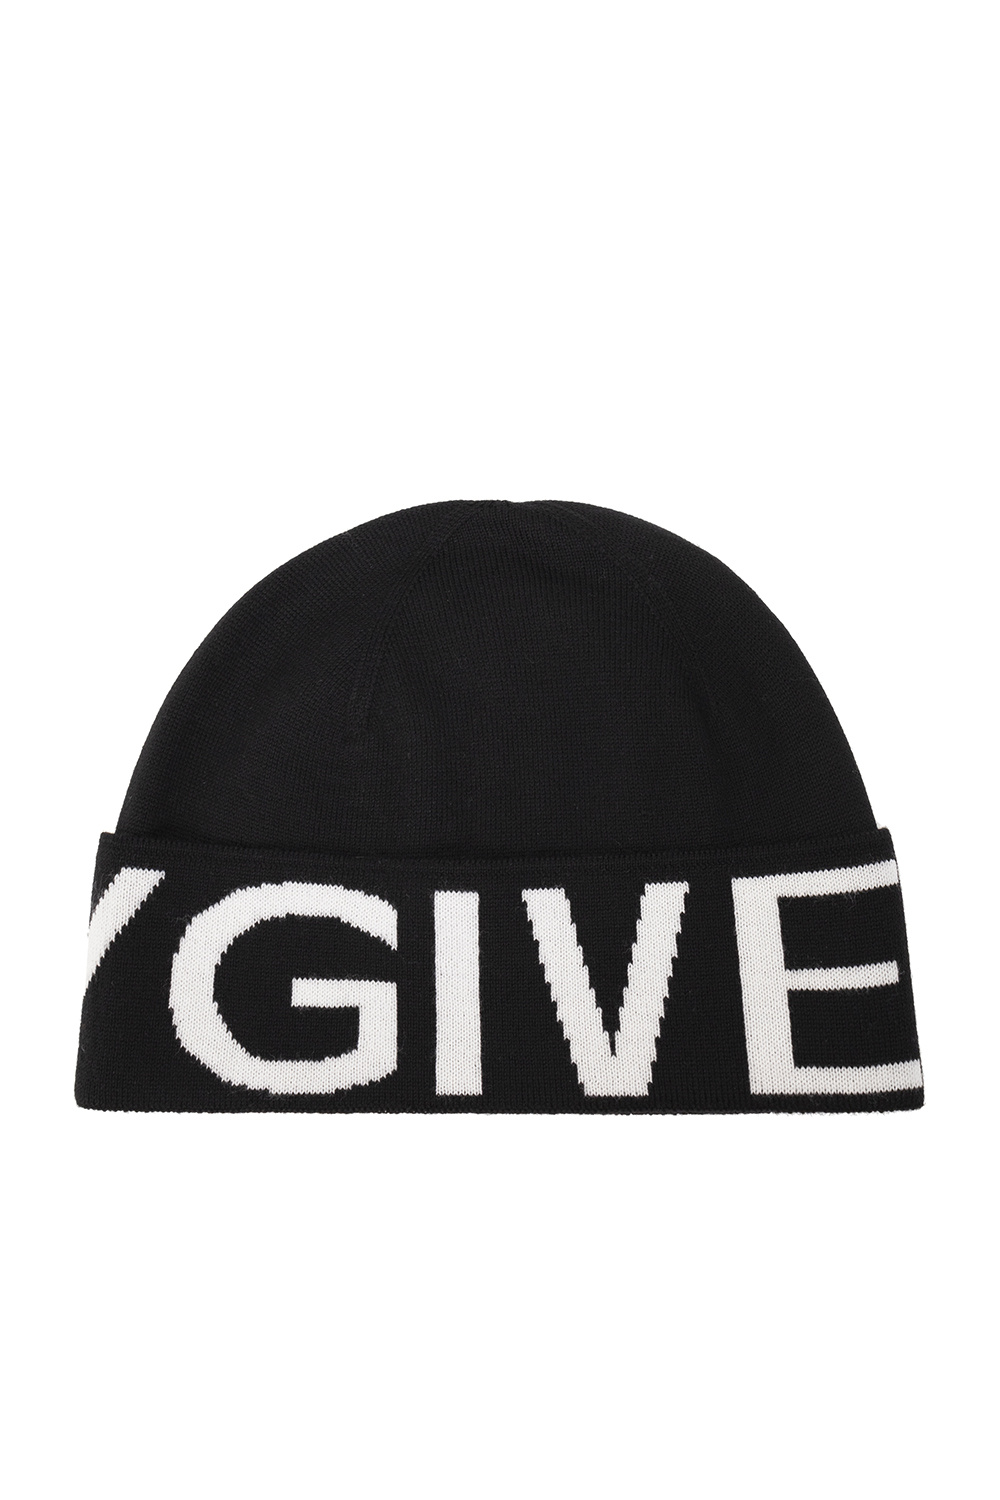 Givenchy Wool beanie with logo